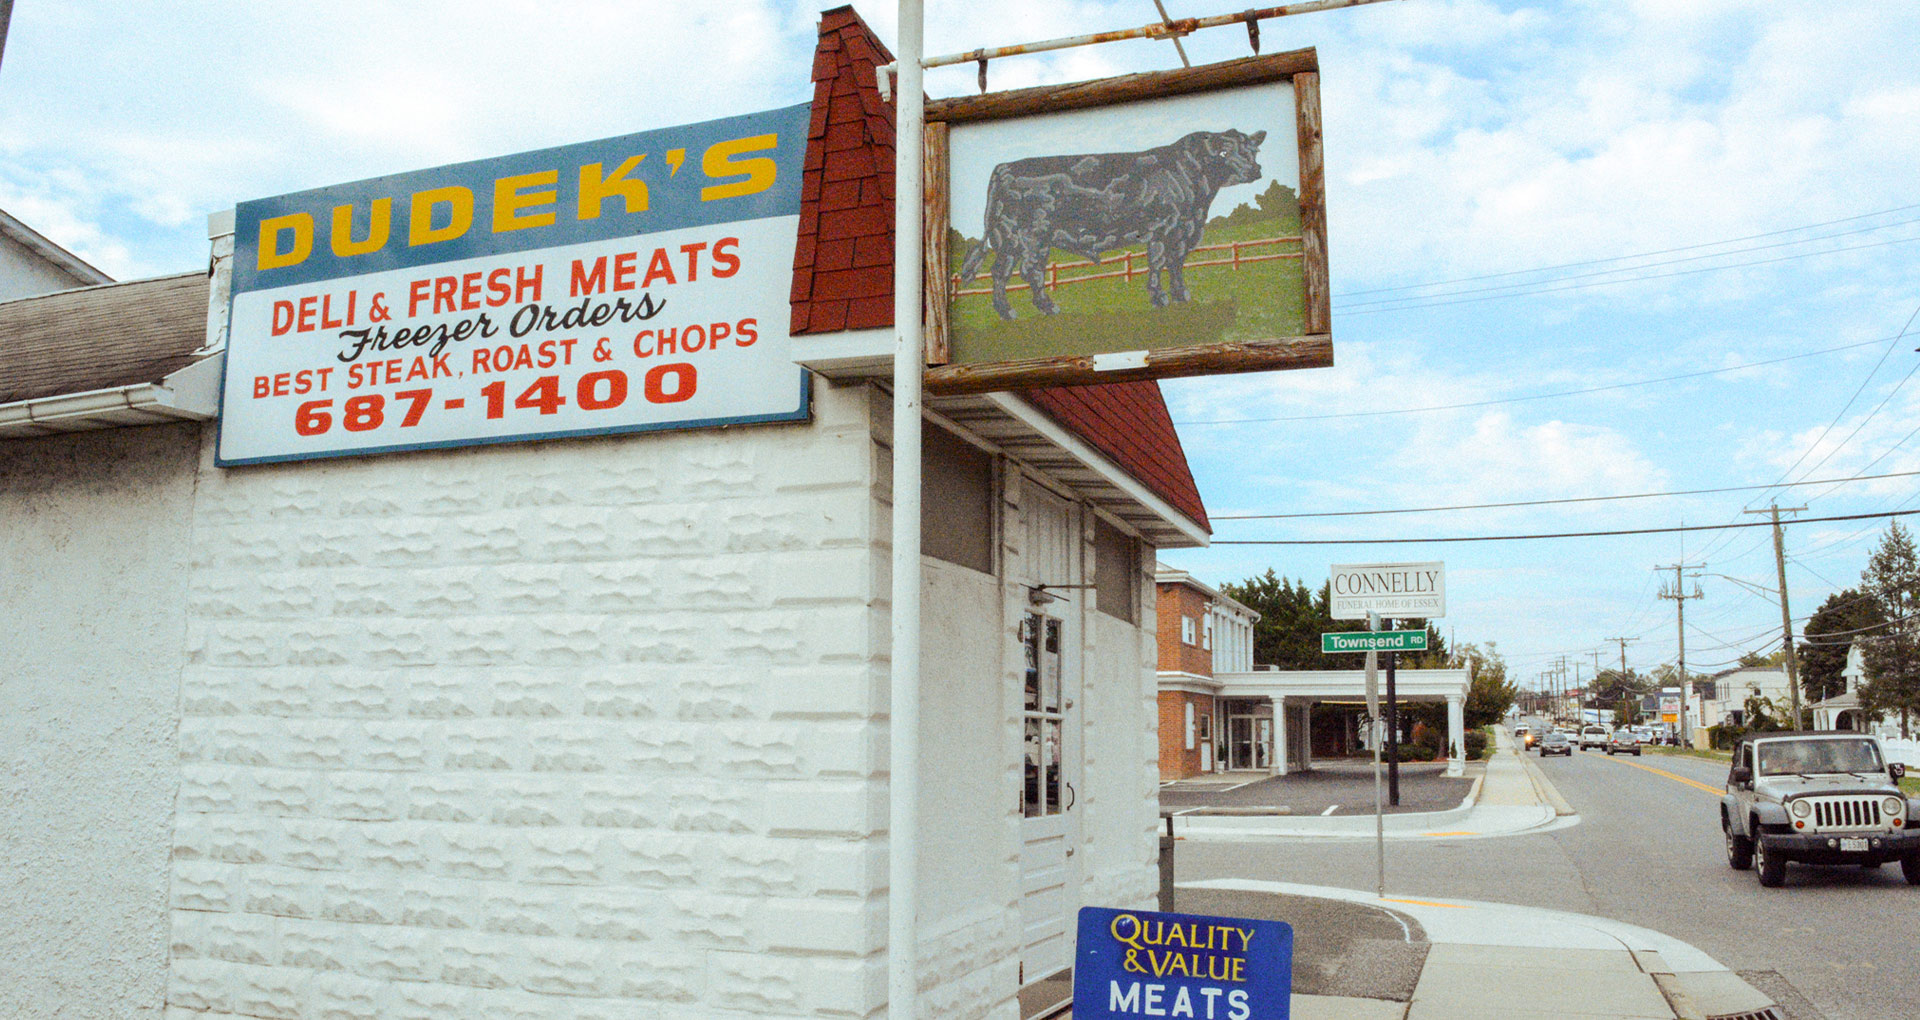 view of the outside of the butcher shop with Dudek's sign and painted image of a cow